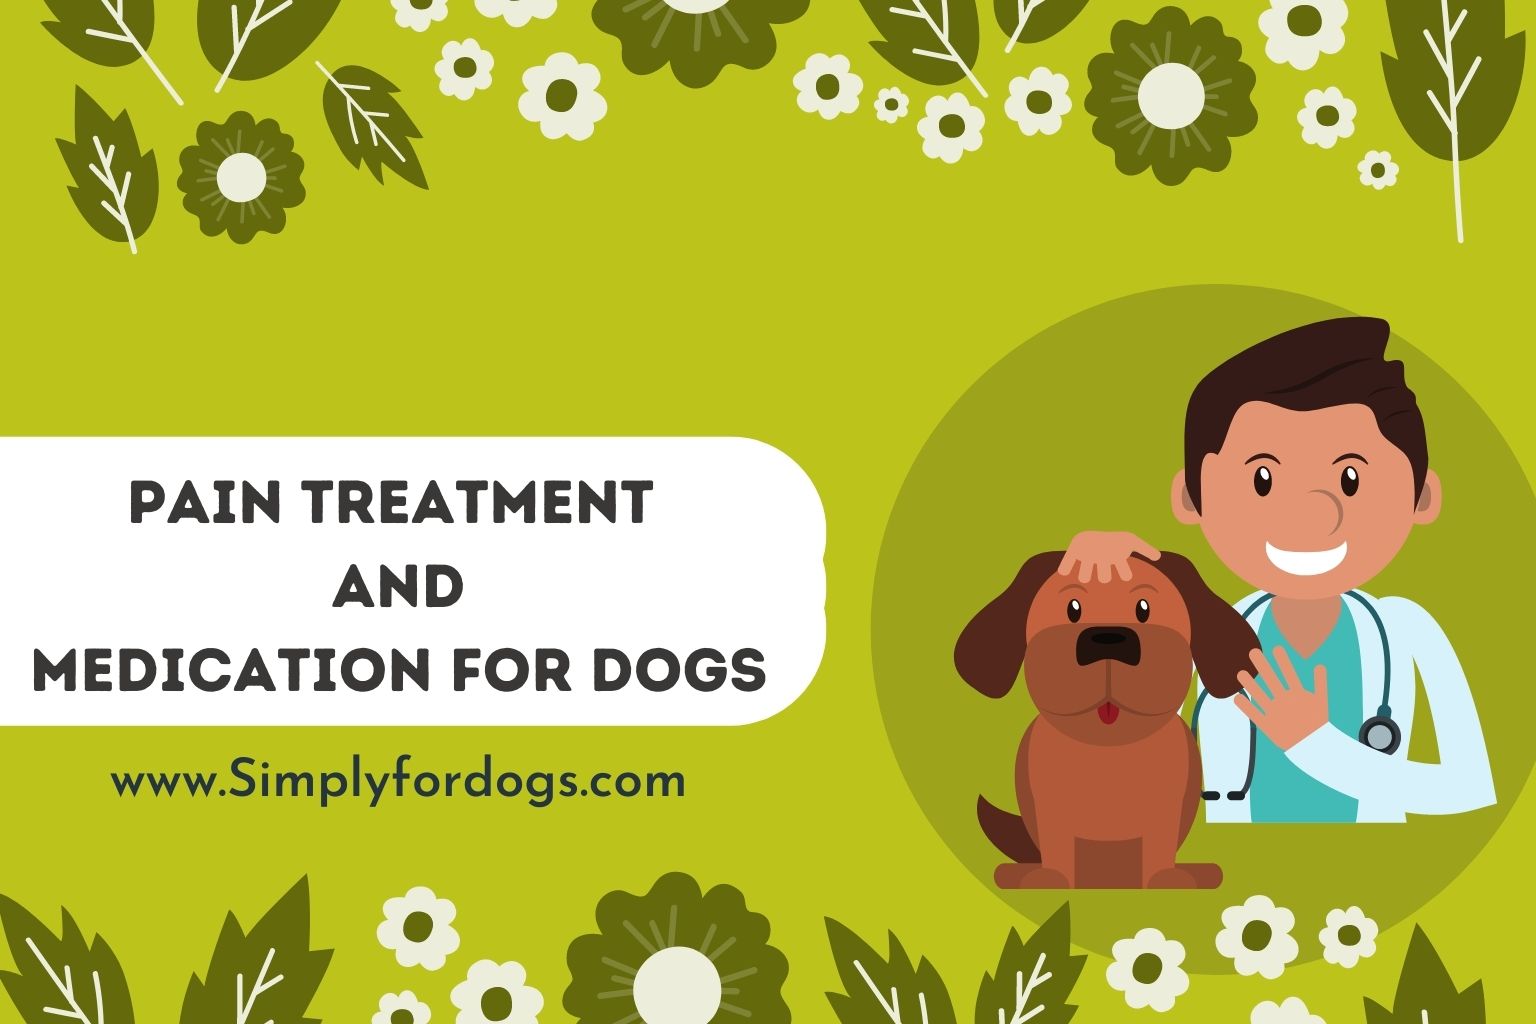 Pain Treatment and Medication for Dogs